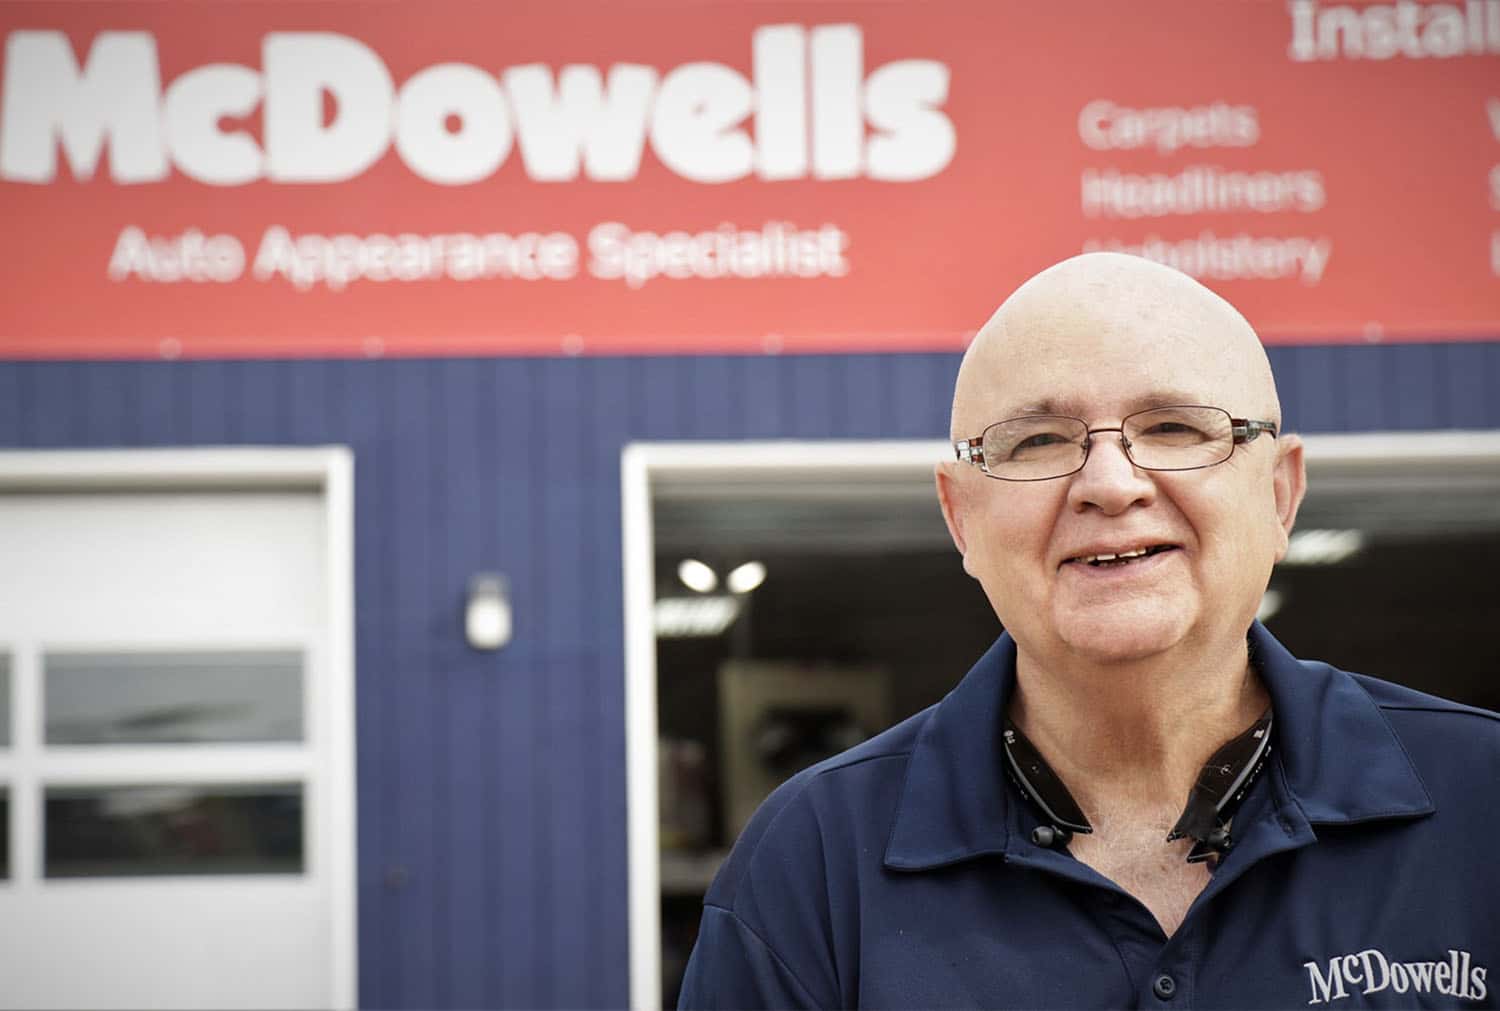 There's a picture of Paul, the Furniture Master Tech. He's standing in front of McDowell's building.